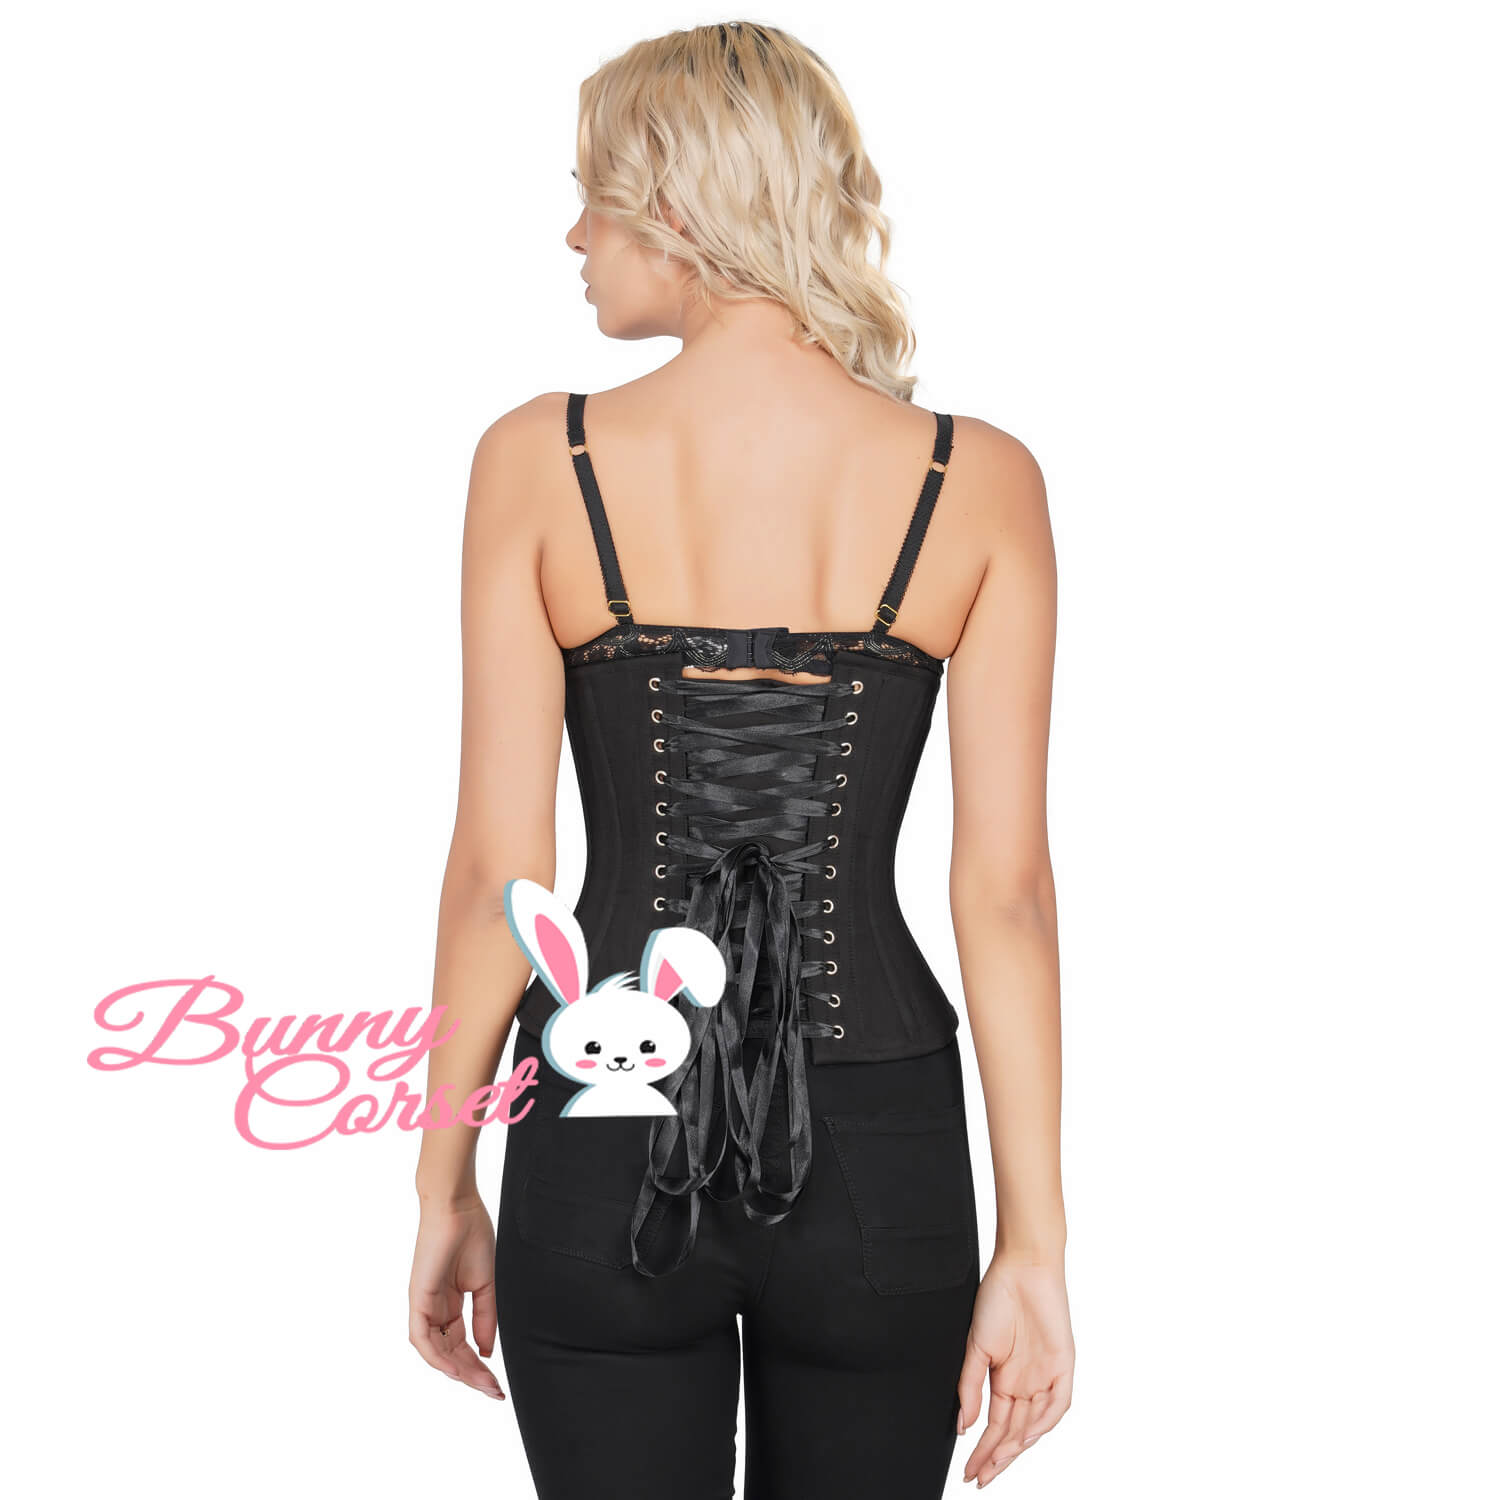 Why is Waist Training in a Fashion Corset, not a Great Idea? – Bunny Corset